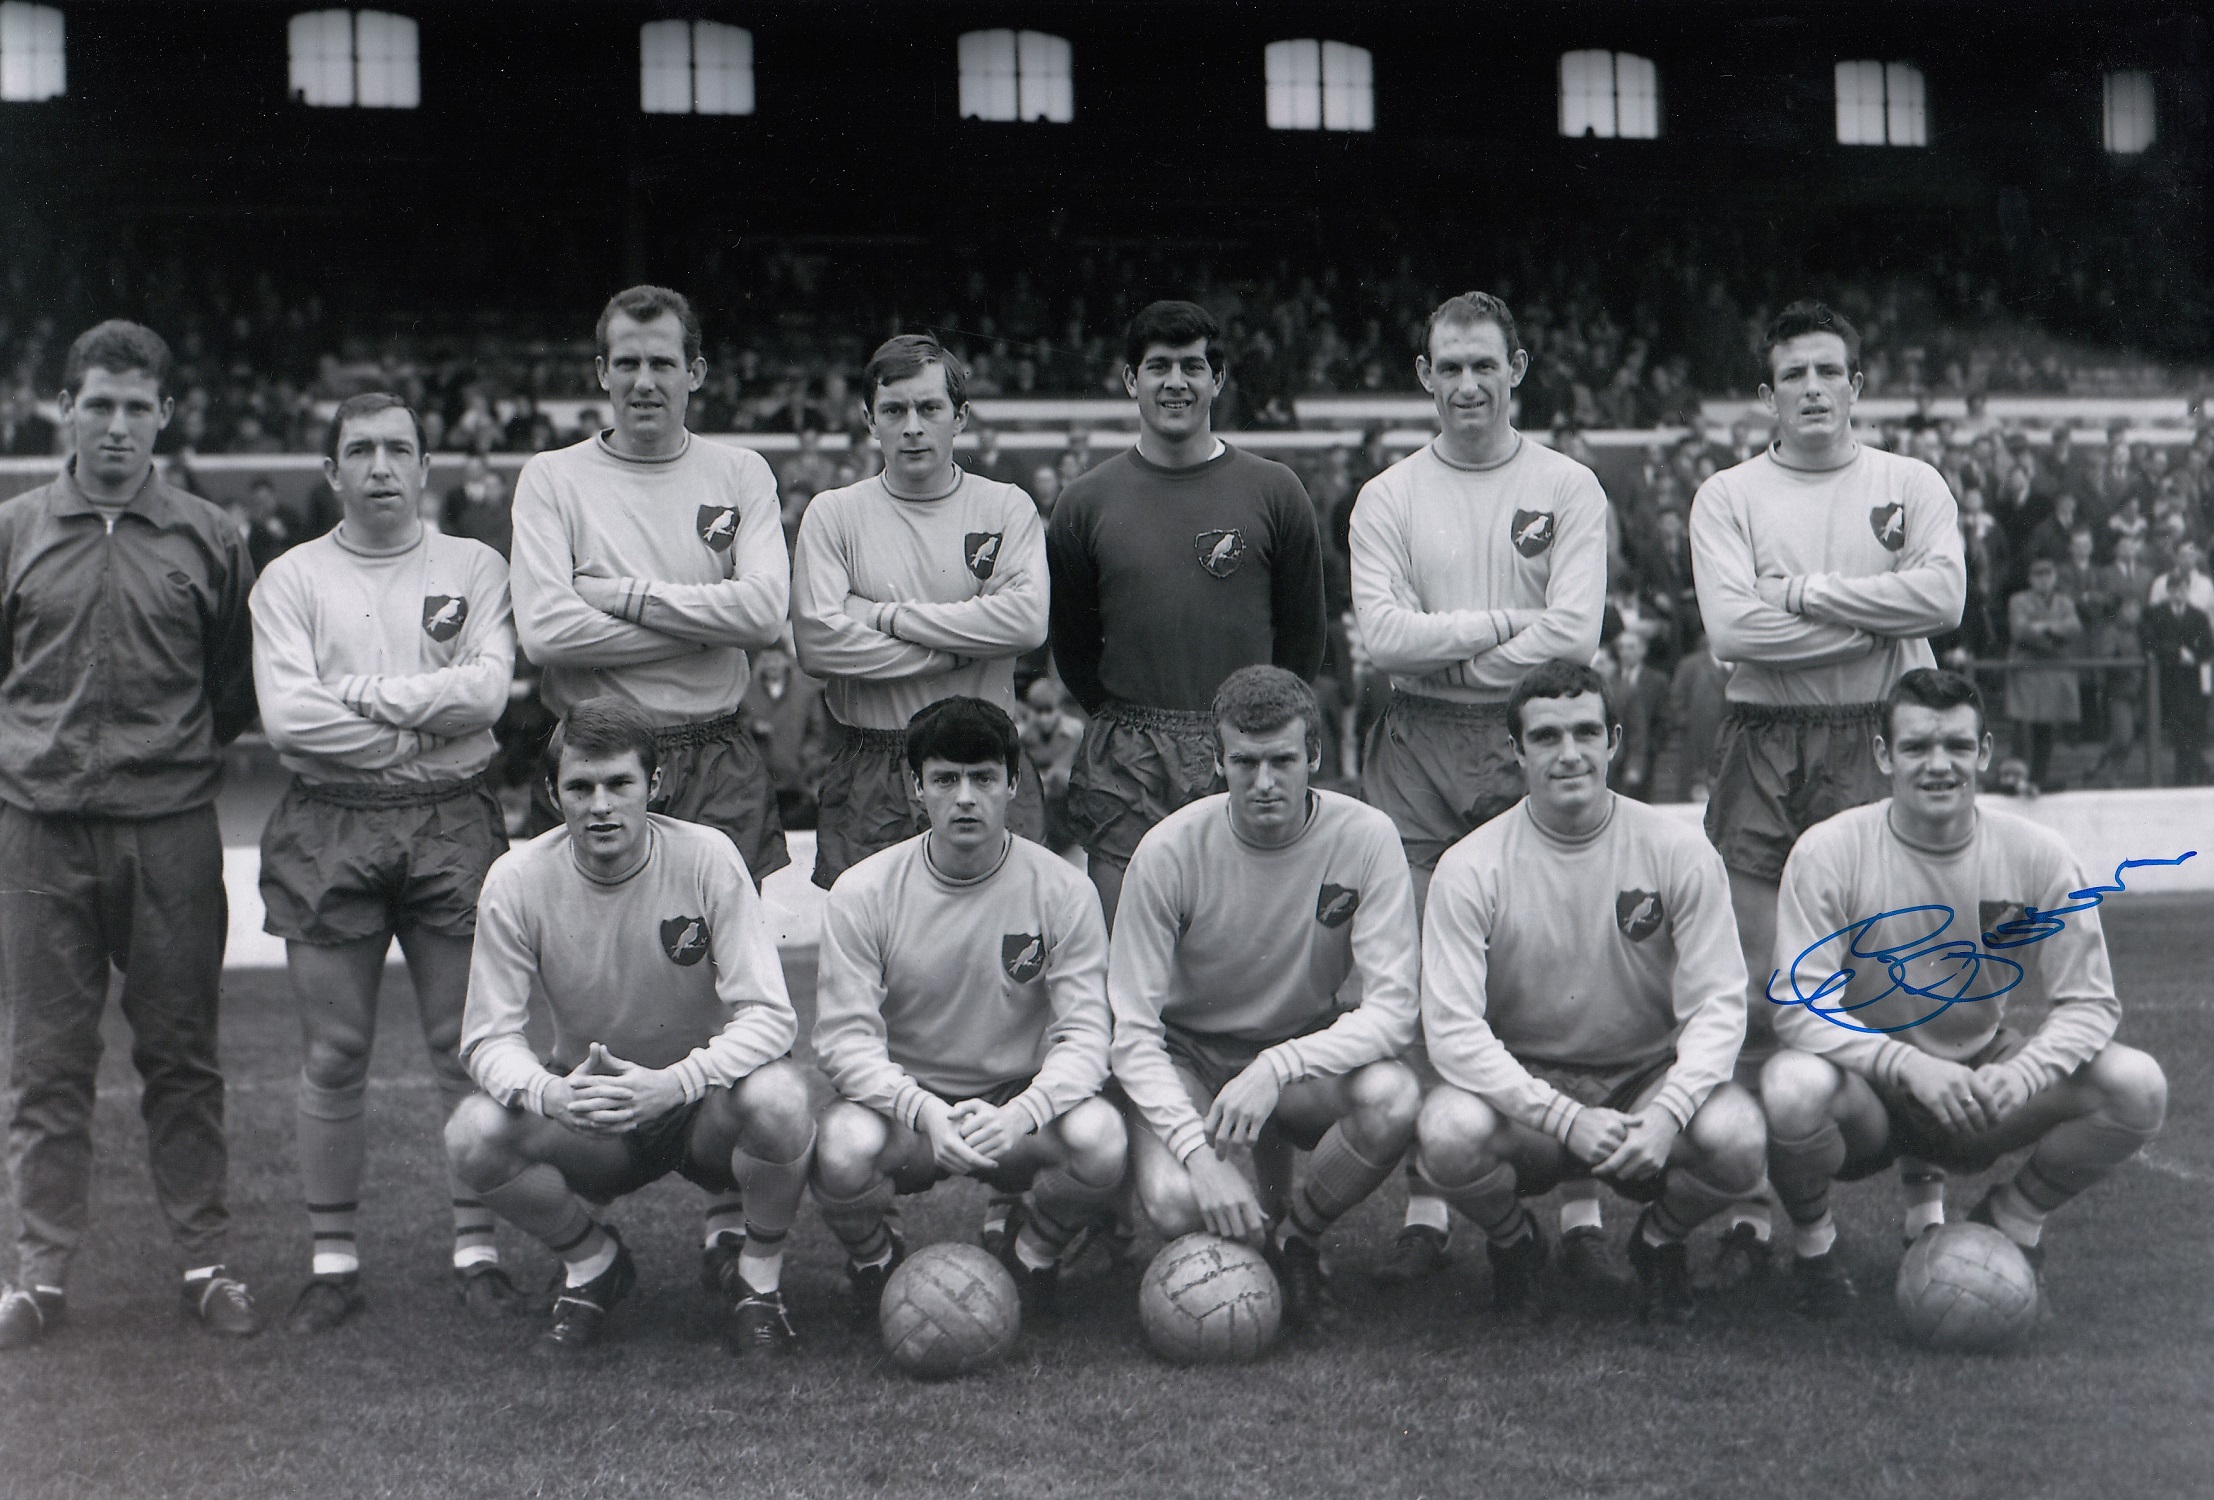 Football Autographed HUGH CURRAN photo, a superb image depicting Norwich City players posing for a